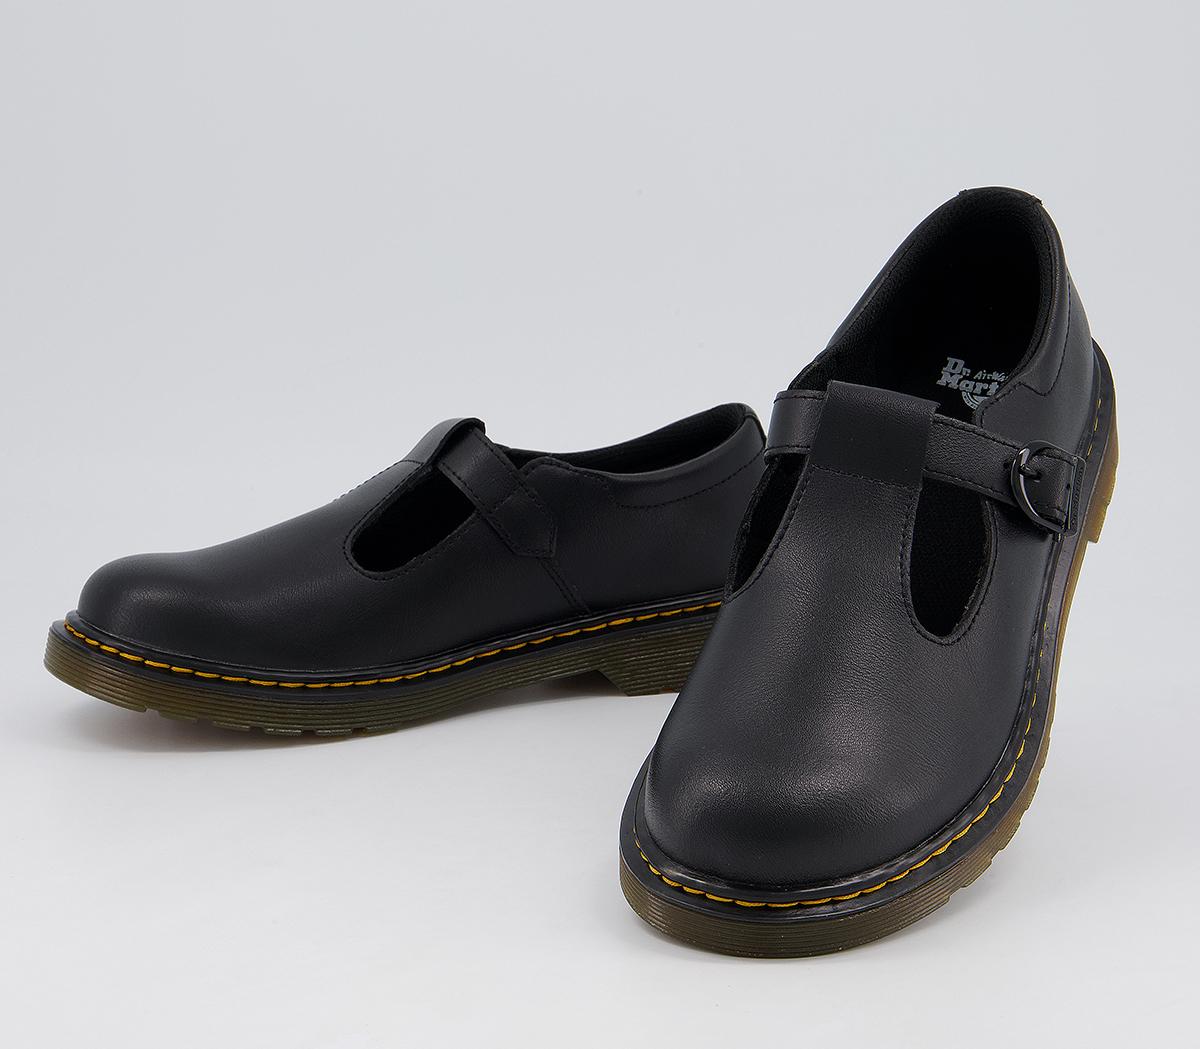 Dr. Martens Polley Youth Shoes Black - Flat Shoes for Women